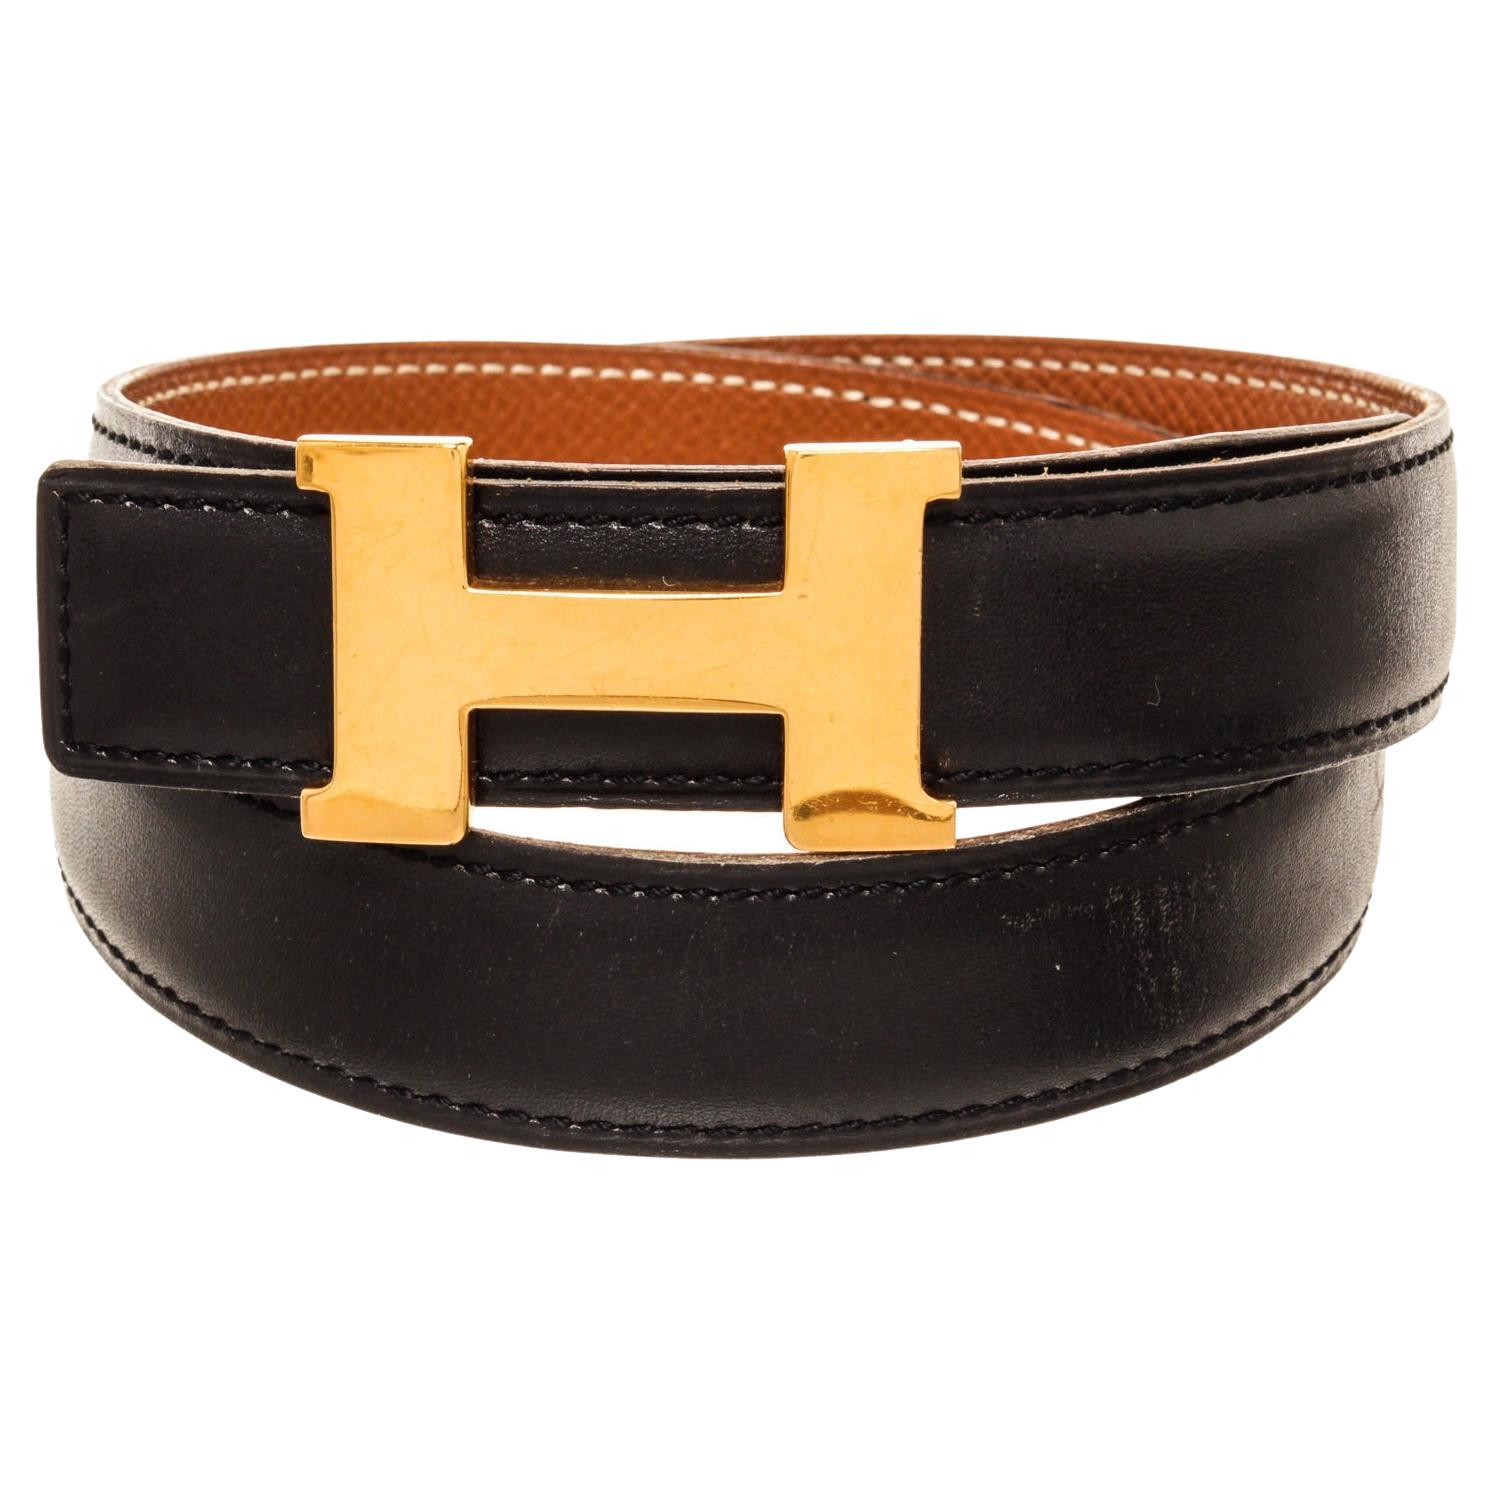 Black and brown leather Hermes reversible Mini Constance belt 